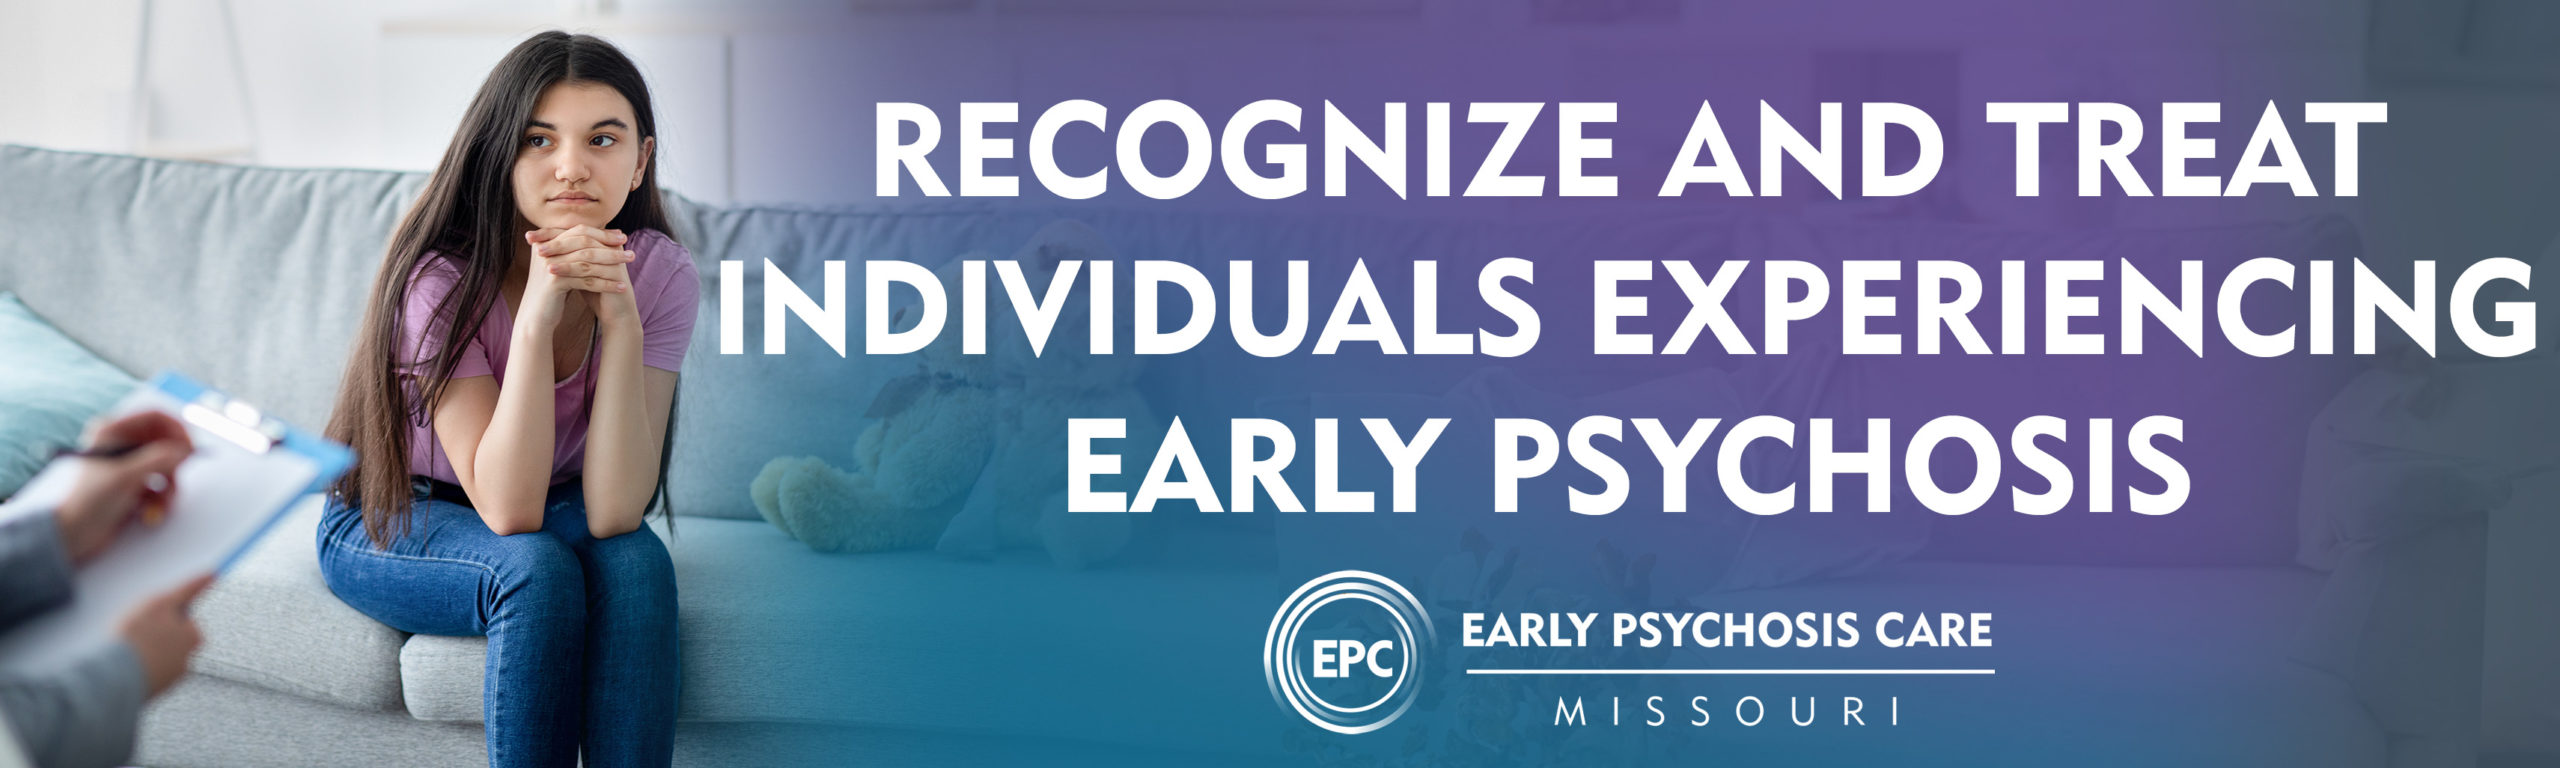 Recognize and treat individuals experiencing early psychosis